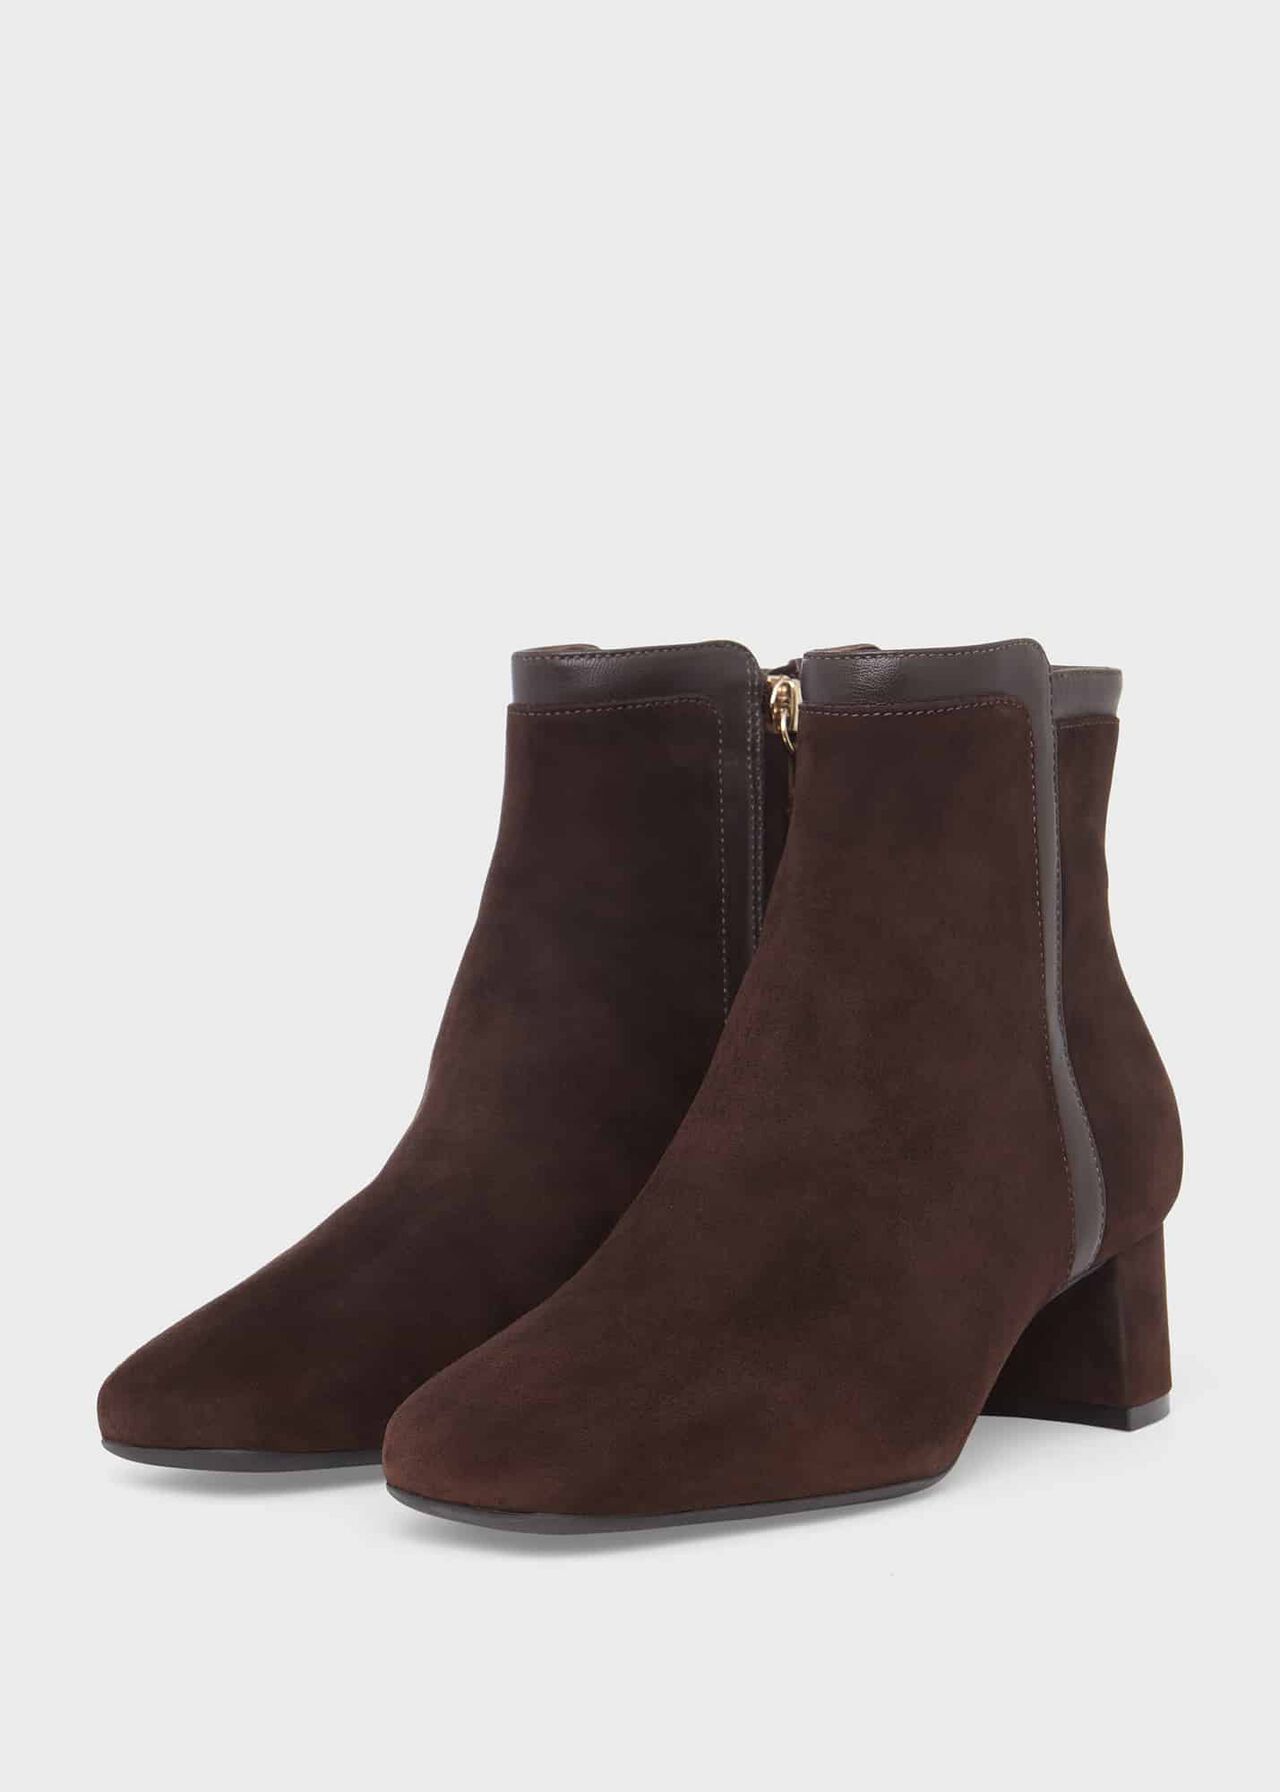 Iro Suede Ankle Boots, Dark Brown, hi-res